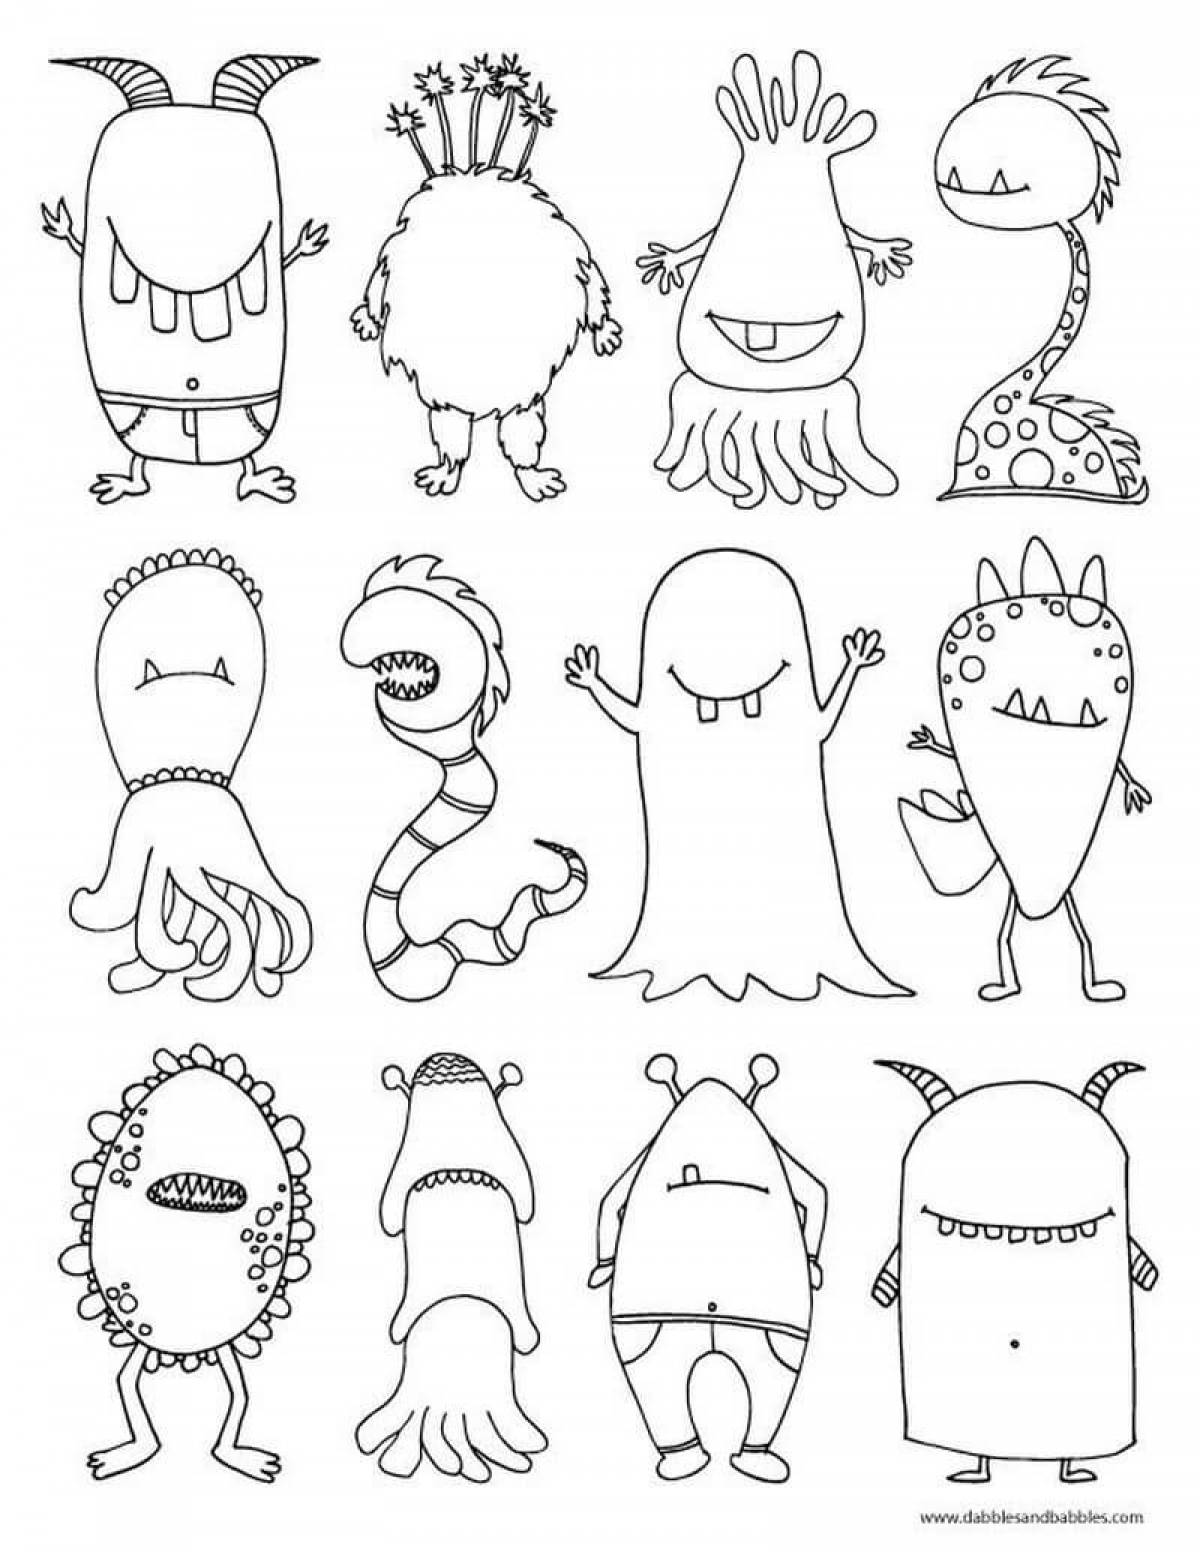 Fuzzable coloring page monsters baby